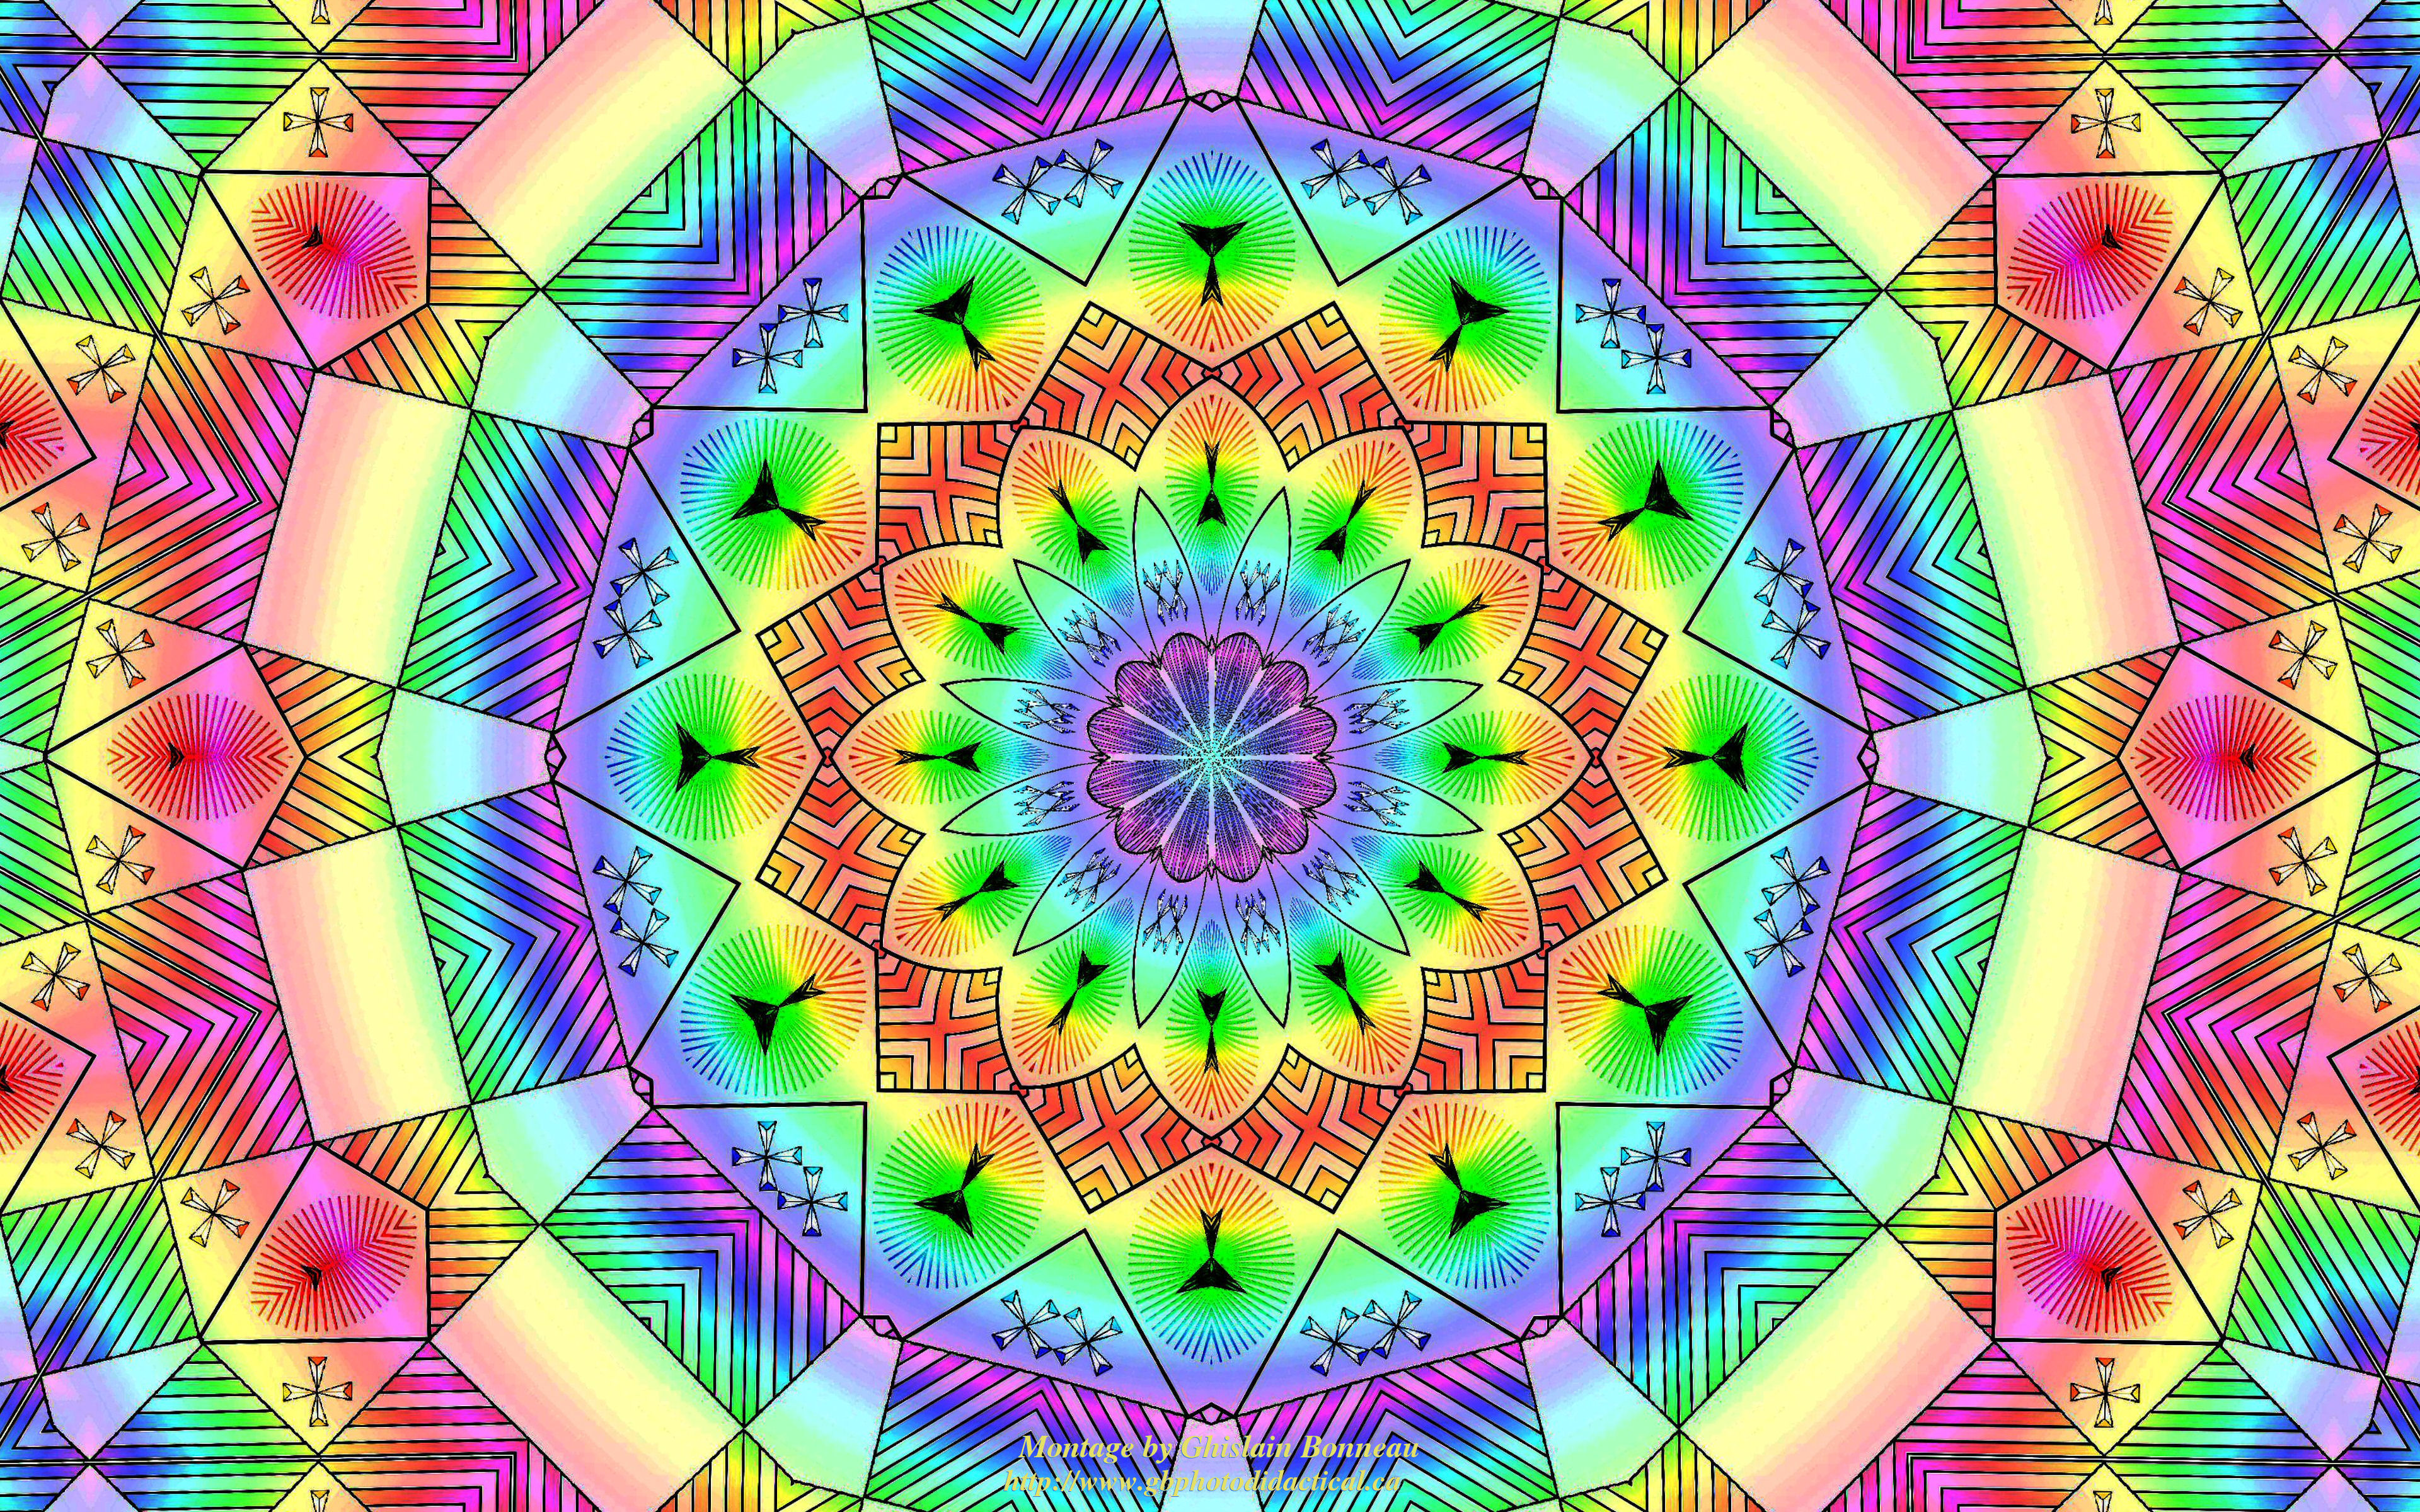 Free Wallpaper Psychedelic Kaleidoscope 16 Positive Image HD Wallpapers Download Free Images Wallpaper [wallpaper981.blogspot.com]